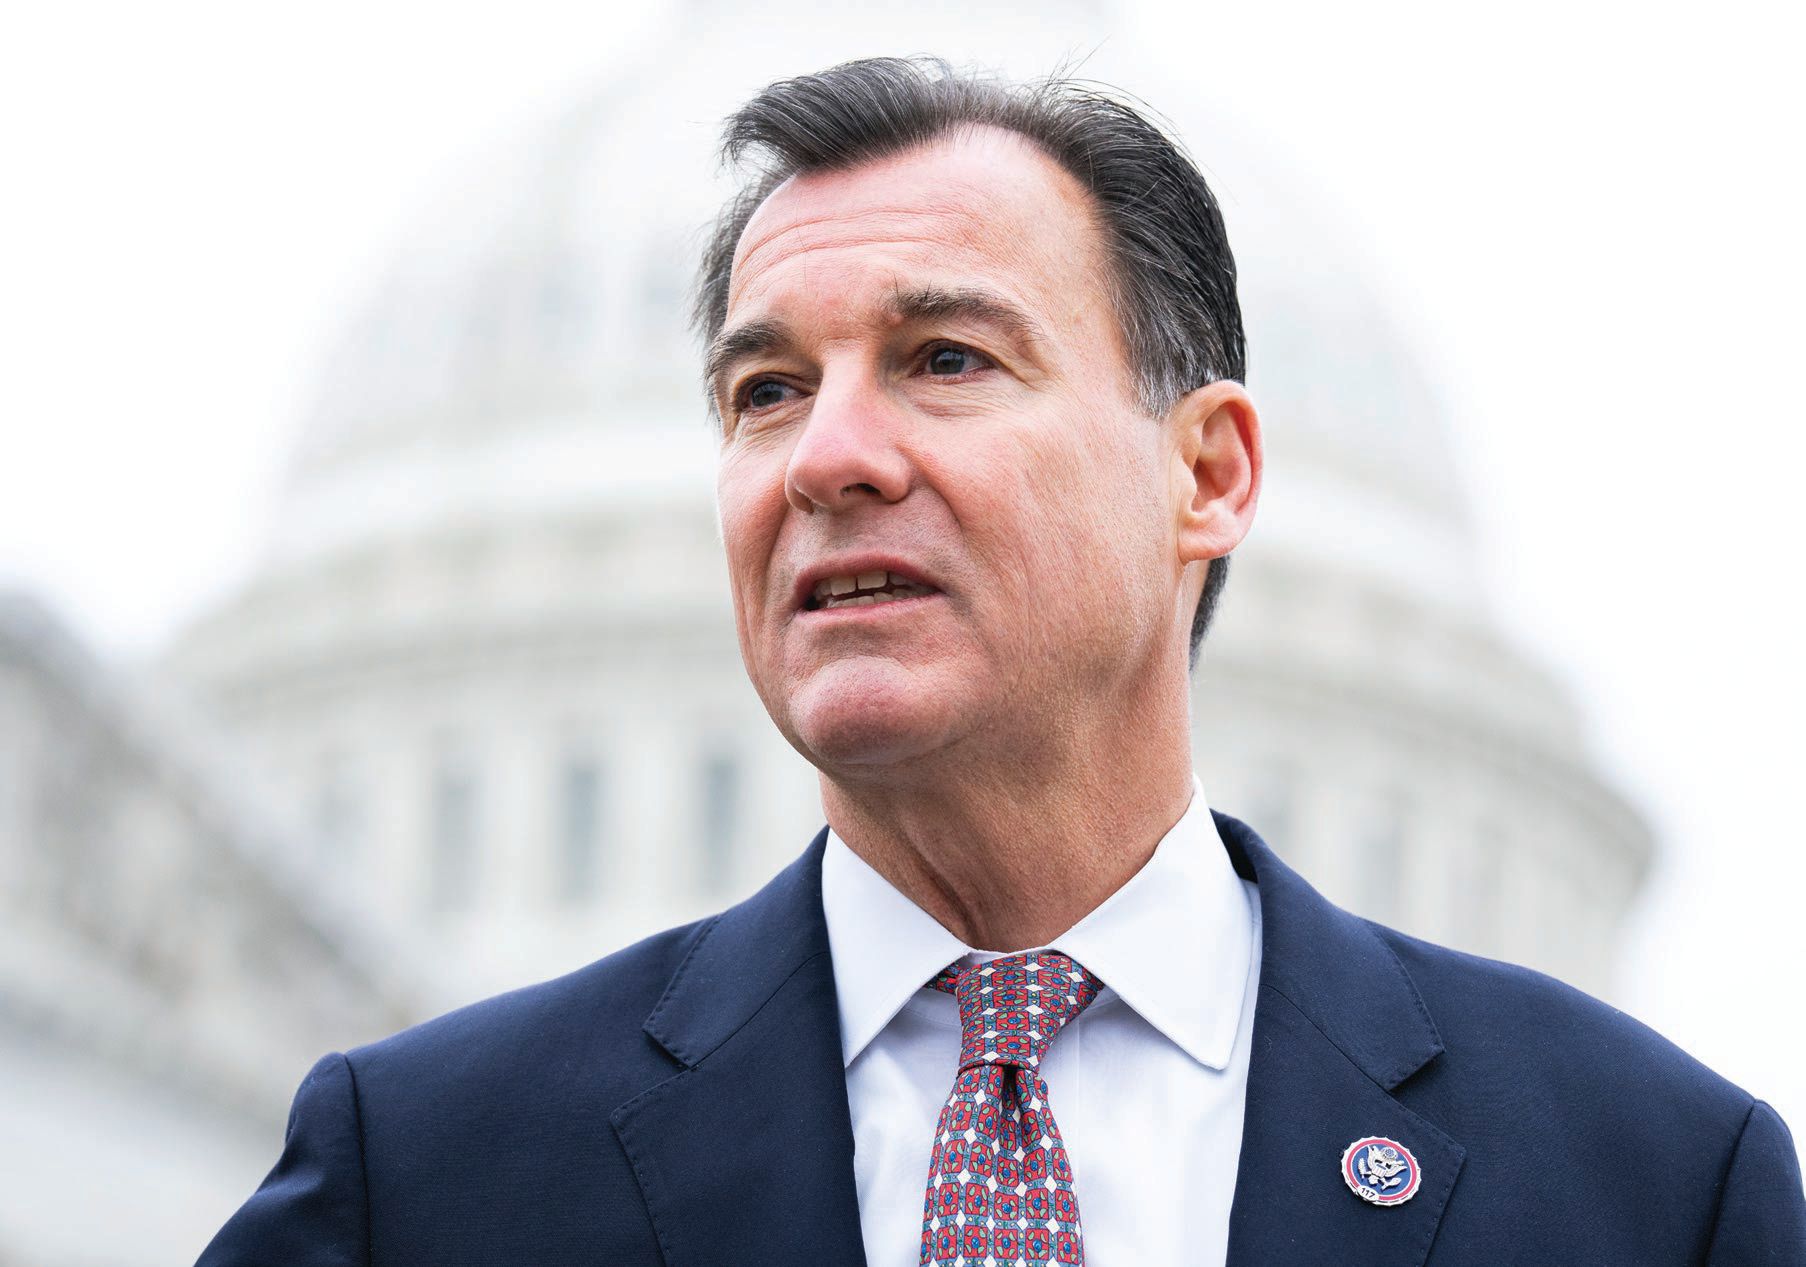 New York gubernatorial candidate Tom Suozzi PHOTO BY CQ-ROLL CALL/GETTY IMAGES